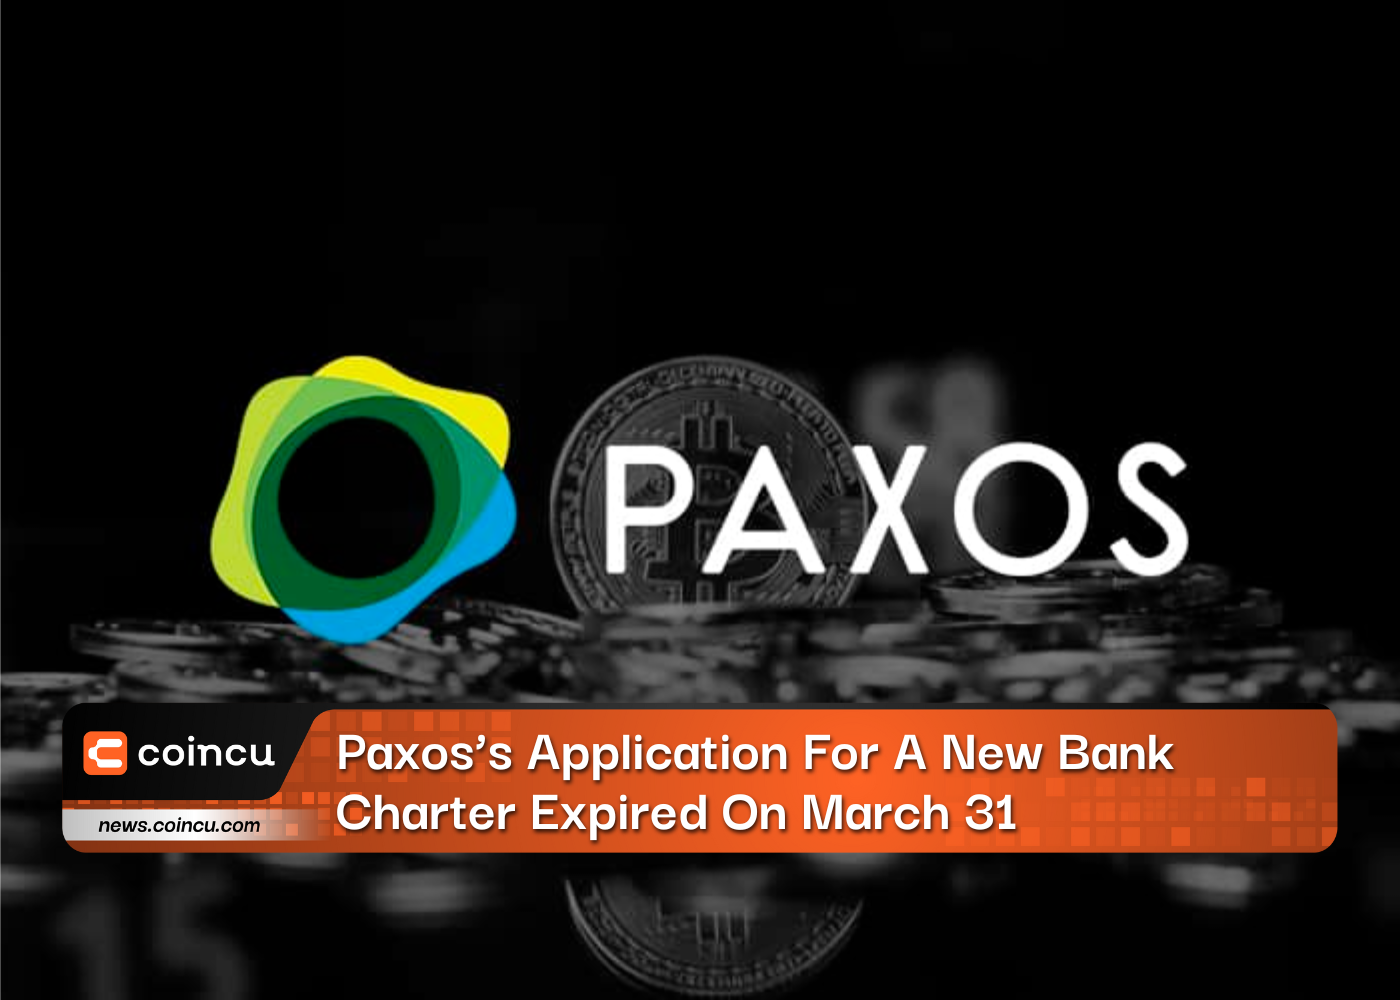 Paxos’s Application For A New Bank Charter Expired On March 31